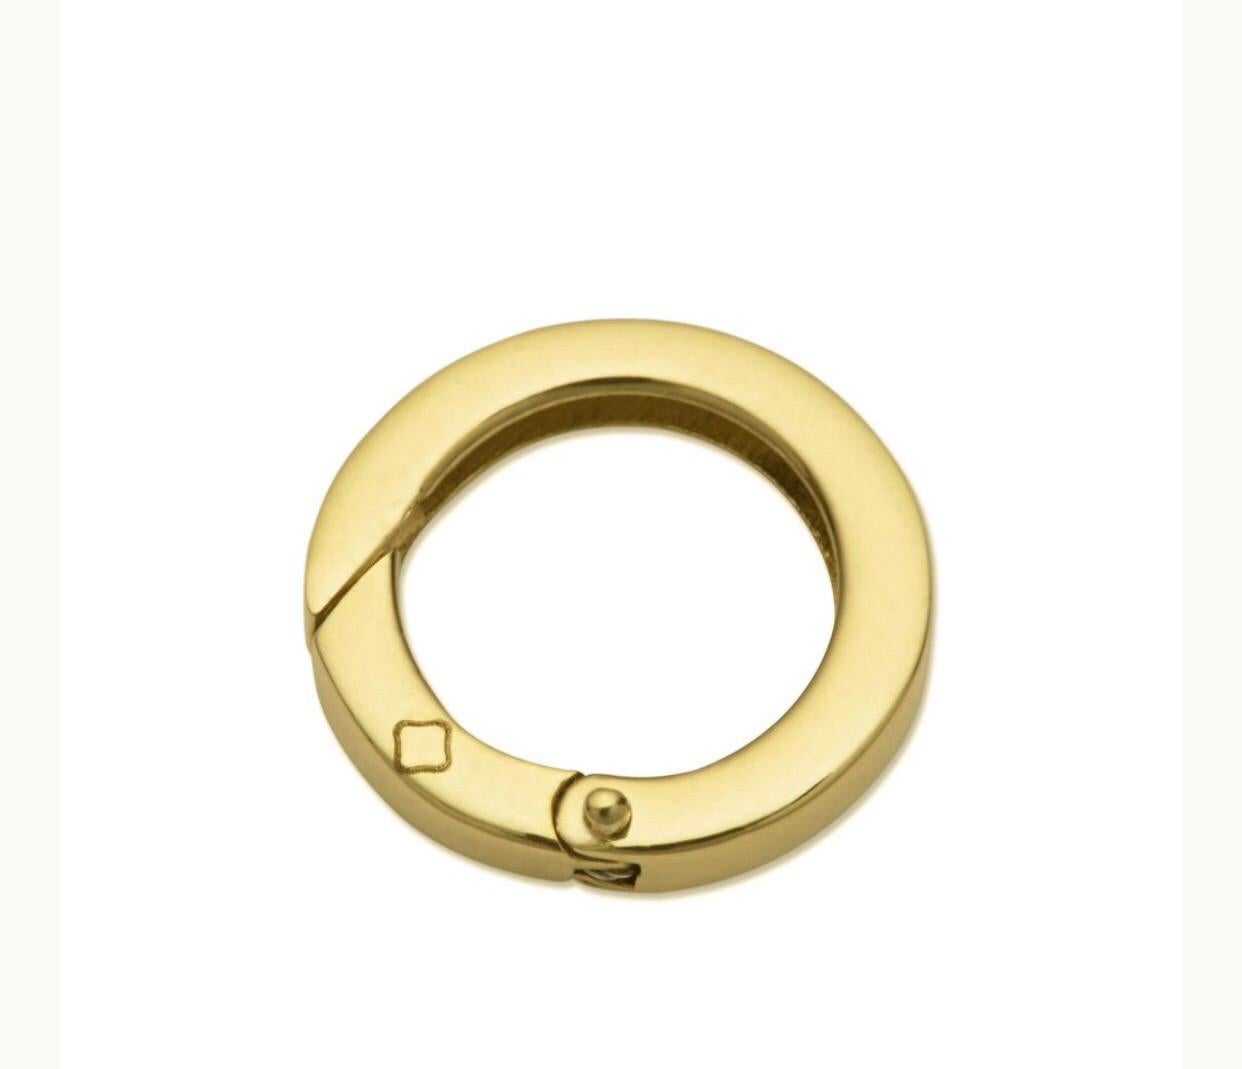 MAVIADA’s 18 karat Yellow Gold Jump Ring Accessories for Necklaces and Pendants